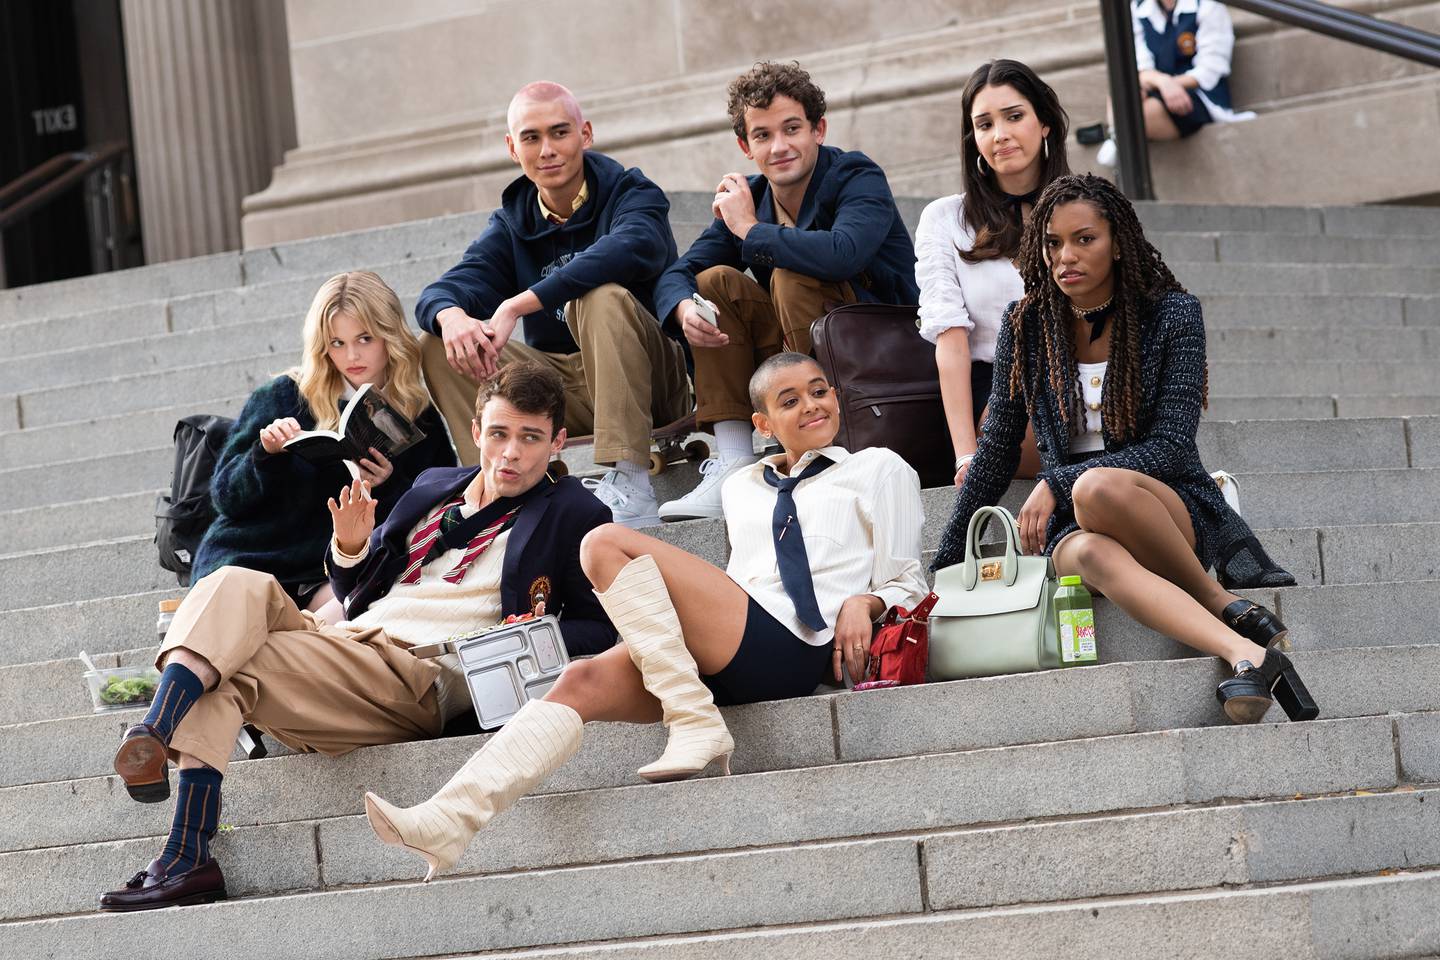 Cast images from the Gossip Girl reboot is prime real estate for fashion brands eager to cash in on the hype. Getty Images.